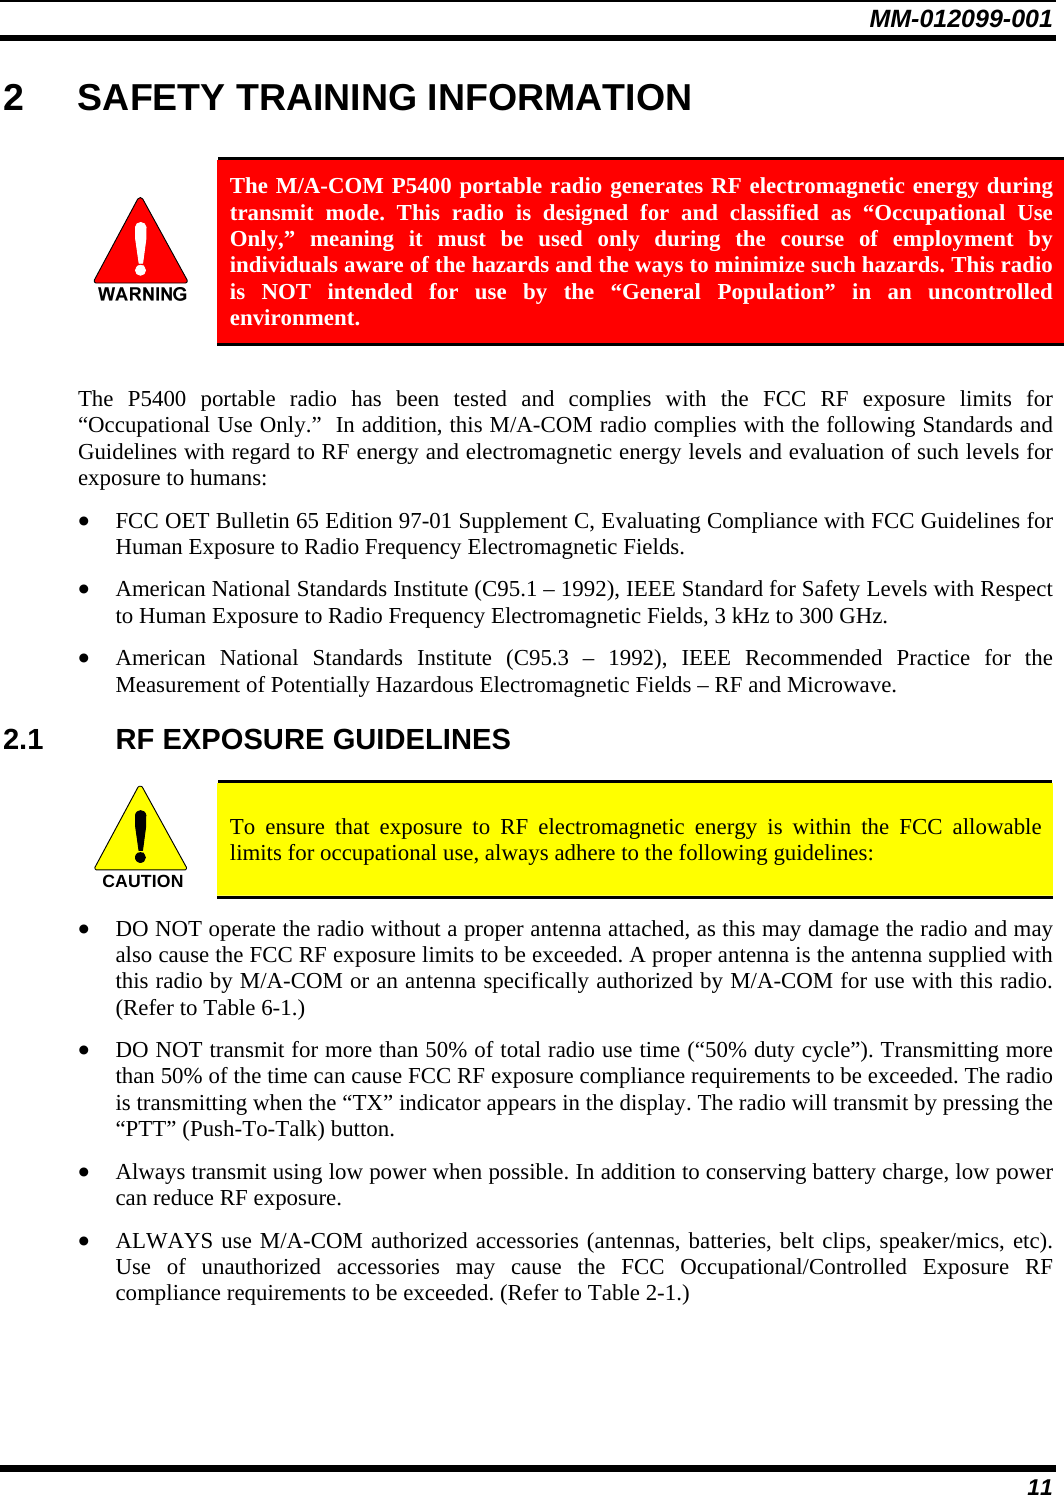 MM-012099-001 11 2  SAFETY TRAINING INFORMATION   The M/A-COM P5400 portable radio generates RF electromagnetic energy during transmit mode. This radio is designed for and classified as “Occupational Use Only,” meaning it must be used only during the course of employment by individuals aware of the hazards and the ways to minimize such hazards. This radio is NOT intended for use by the “General Population” in an uncontrolled environment.  The P5400 portable radio has been tested and complies with the FCC RF exposure limits for “Occupational Use Only.”  In addition, this M/A-COM radio complies with the following Standards and Guidelines with regard to RF energy and electromagnetic energy levels and evaluation of such levels for exposure to humans: • FCC OET Bulletin 65 Edition 97-01 Supplement C, Evaluating Compliance with FCC Guidelines for Human Exposure to Radio Frequency Electromagnetic Fields. • American National Standards Institute (C95.1 – 1992), IEEE Standard for Safety Levels with Respect to Human Exposure to Radio Frequency Electromagnetic Fields, 3 kHz to 300 GHz. • American National Standards Institute (C95.3 – 1992), IEEE Recommended Practice for the Measurement of Potentially Hazardous Electromagnetic Fields – RF and Microwave. 2.1 RF EXPOSURE GUIDELINES  CAUTION  To ensure that exposure to RF electromagnetic energy is within the FCC allowable limits for occupational use, always adhere to the following guidelines: • DO NOT operate the radio without a proper antenna attached, as this may damage the radio and may also cause the FCC RF exposure limits to be exceeded. A proper antenna is the antenna supplied with this radio by M/A-COM or an antenna specifically authorized by M/A-COM for use with this radio. (Refer to Table 6-1.) • DO NOT transmit for more than 50% of total radio use time (“50% duty cycle”). Transmitting more than 50% of the time can cause FCC RF exposure compliance requirements to be exceeded. The radio is transmitting when the “TX” indicator appears in the display. The radio will transmit by pressing the “PTT” (Push-To-Talk) button. • Always transmit using low power when possible. In addition to conserving battery charge, low power can reduce RF exposure. • ALWAYS use M/A-COM authorized accessories (antennas, batteries, belt clips, speaker/mics, etc). Use of unauthorized accessories may cause the FCC Occupational/Controlled Exposure RF compliance requirements to be exceeded. (Refer to Table 2-1.) 